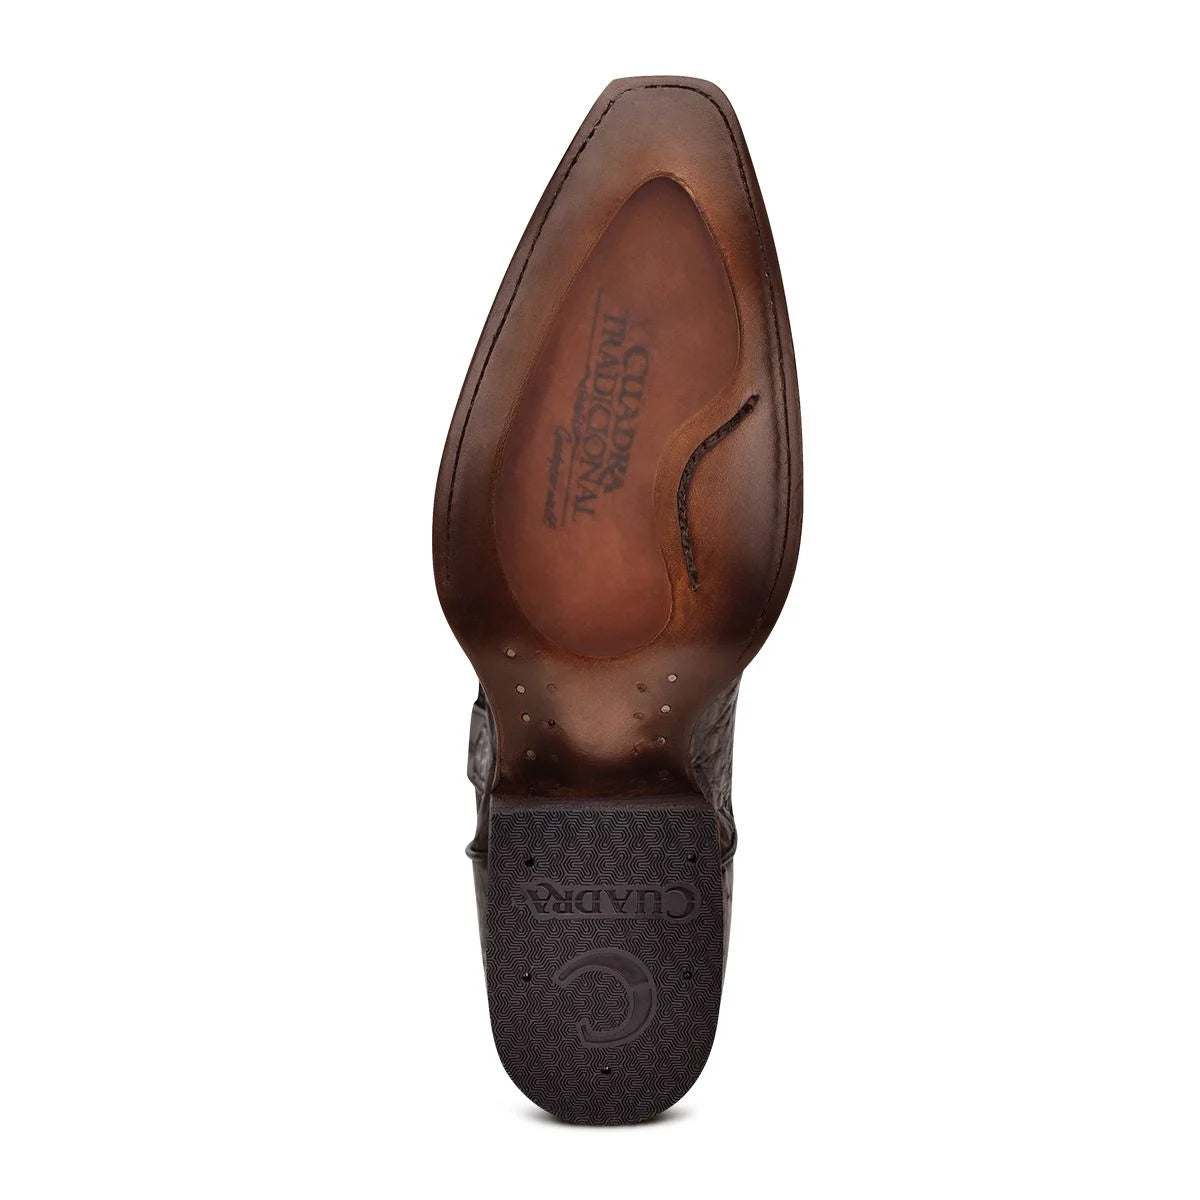 Engraved exotic dark brown leather boot